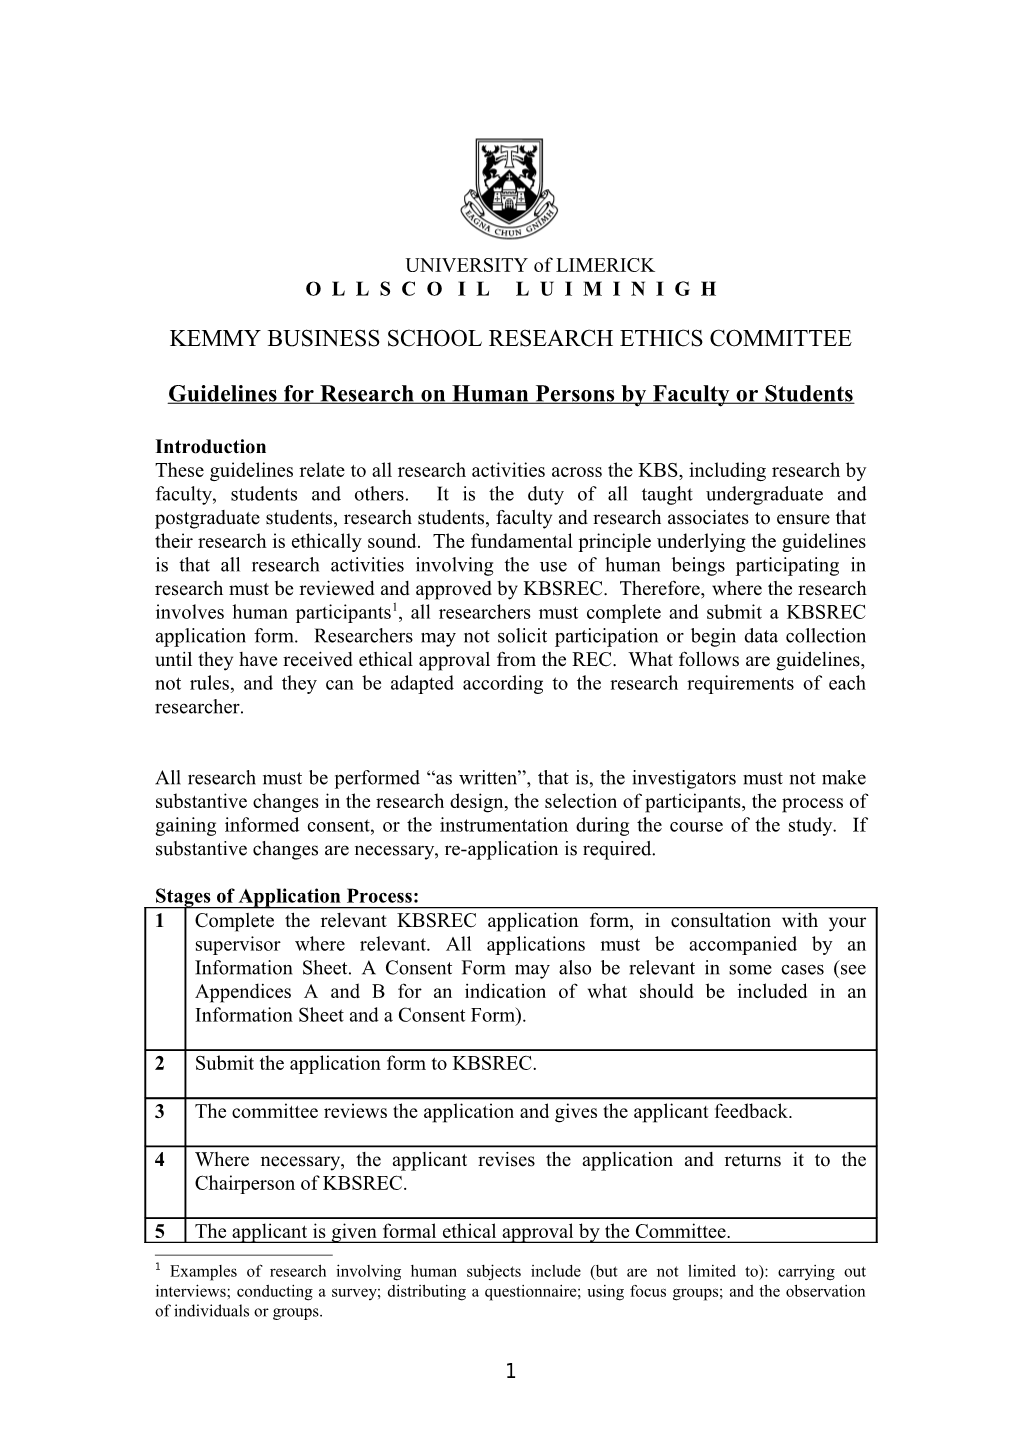 Guidelines for Research on Human Persons by Faculty Or Students